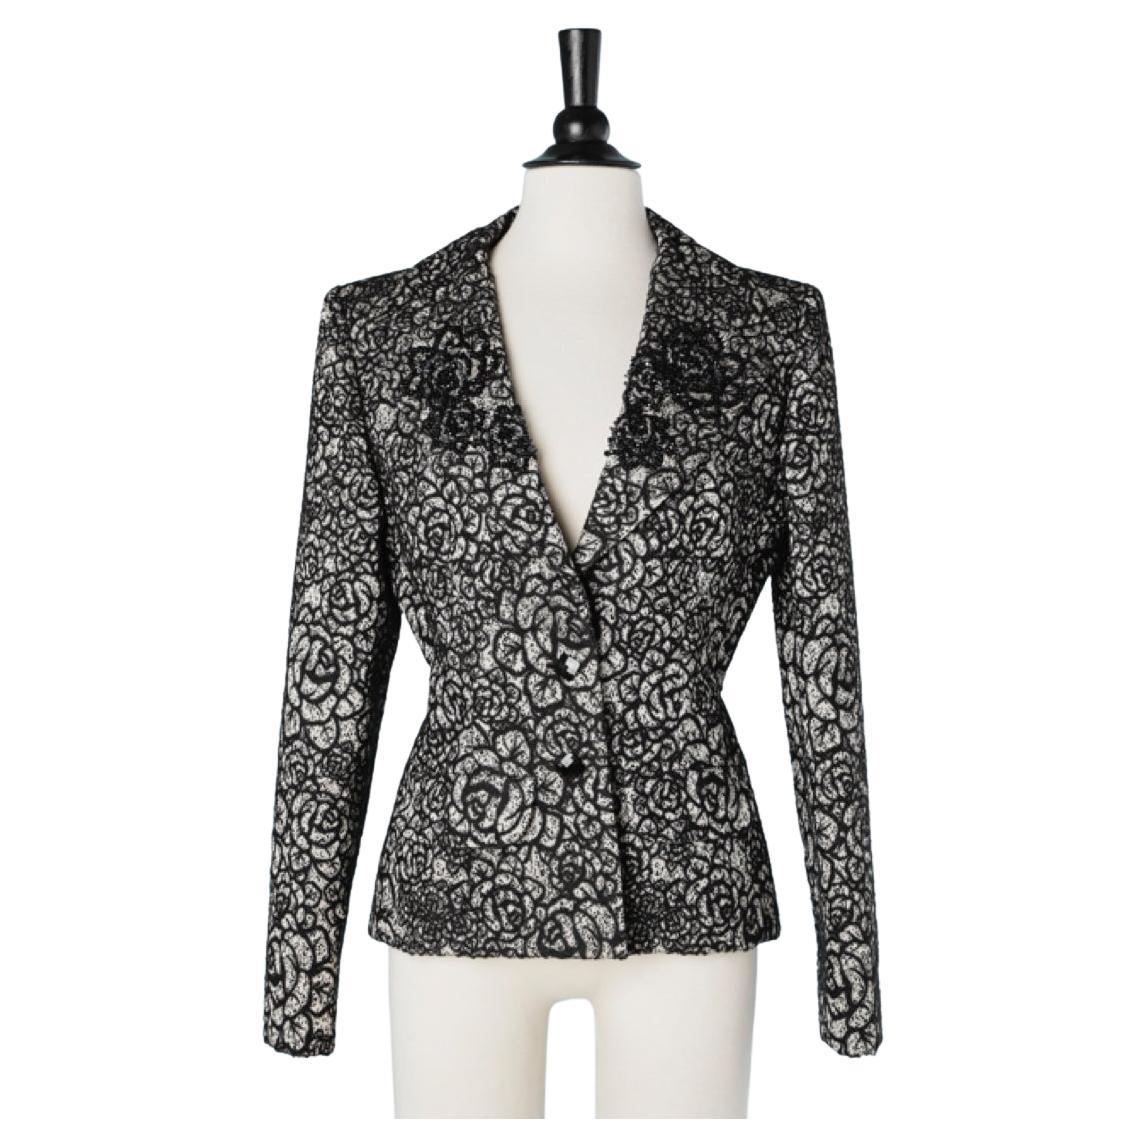 Black and grey damask jacket with beads and sequins collar André Laug  For Sale